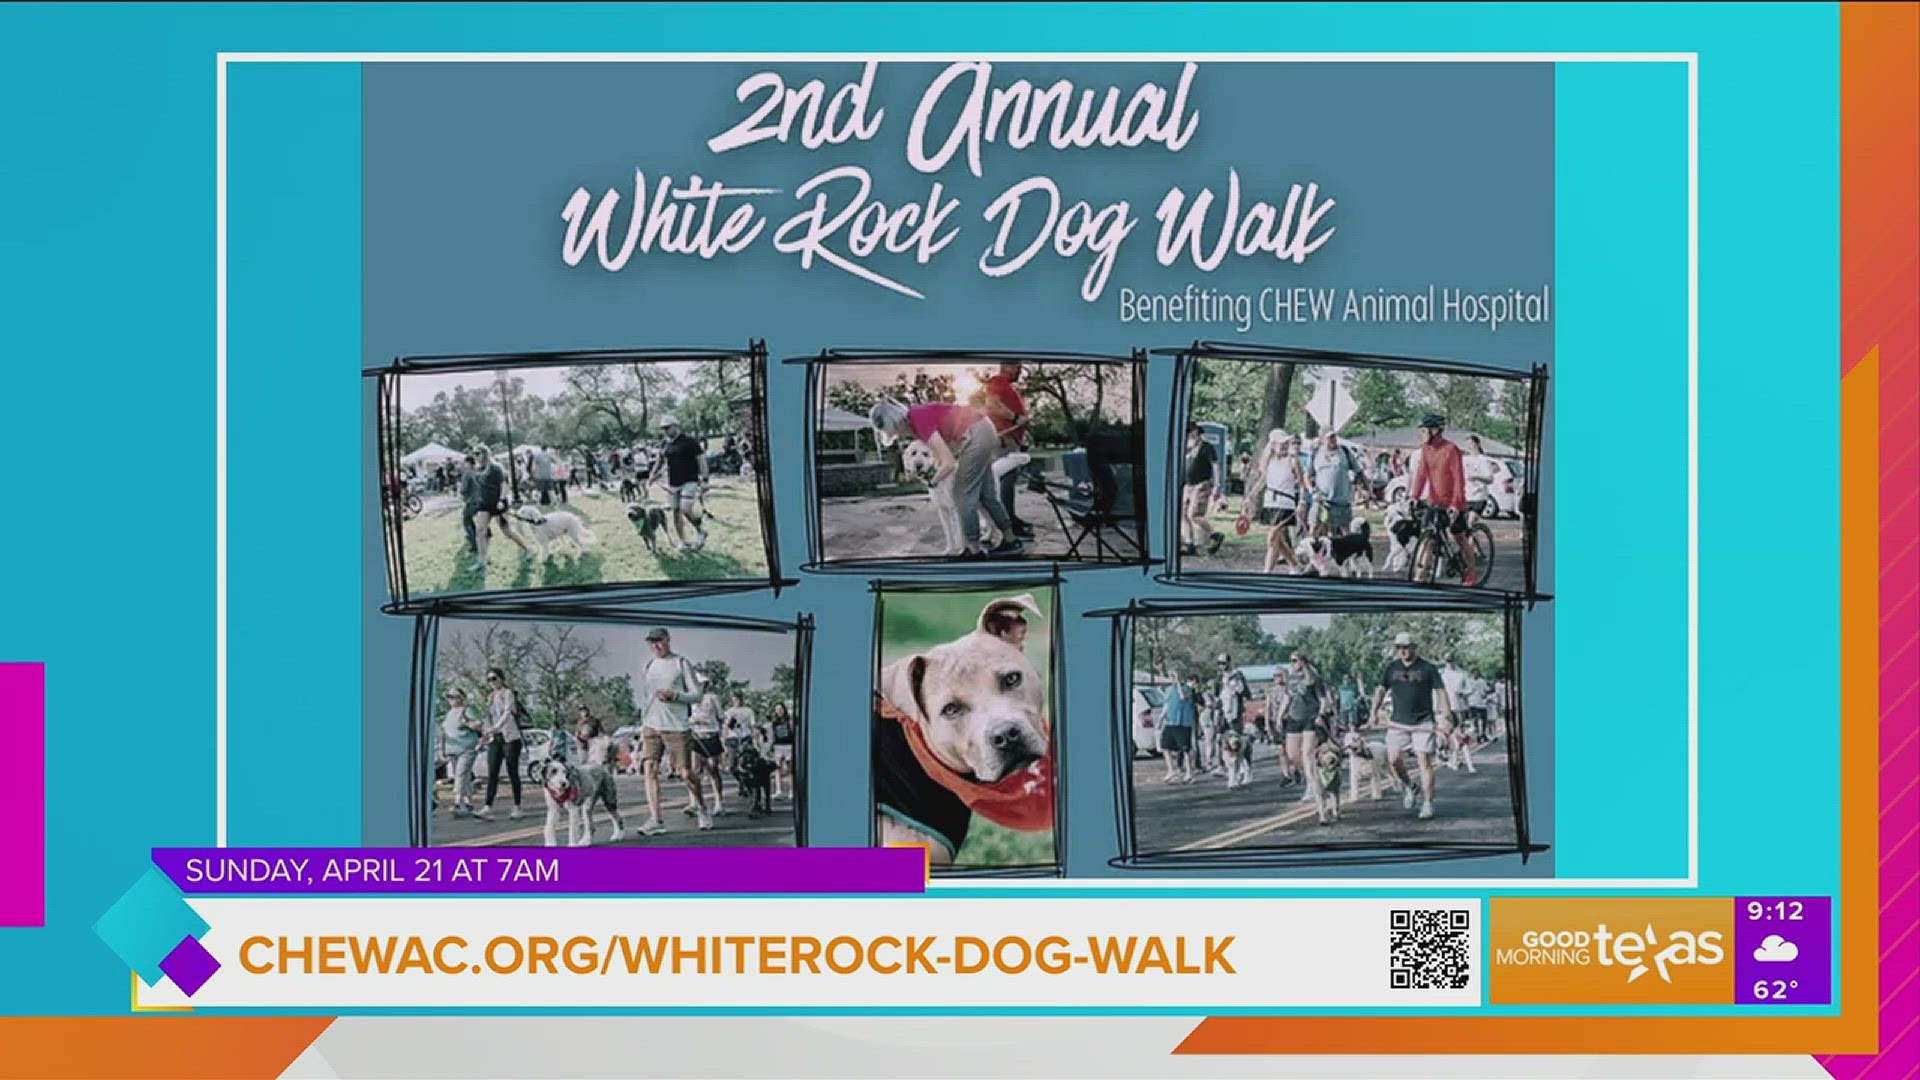 Find out what you can expect at this year's White Rock Dog Park. Go to chewac.org/whiterock-dog-walk for more information.